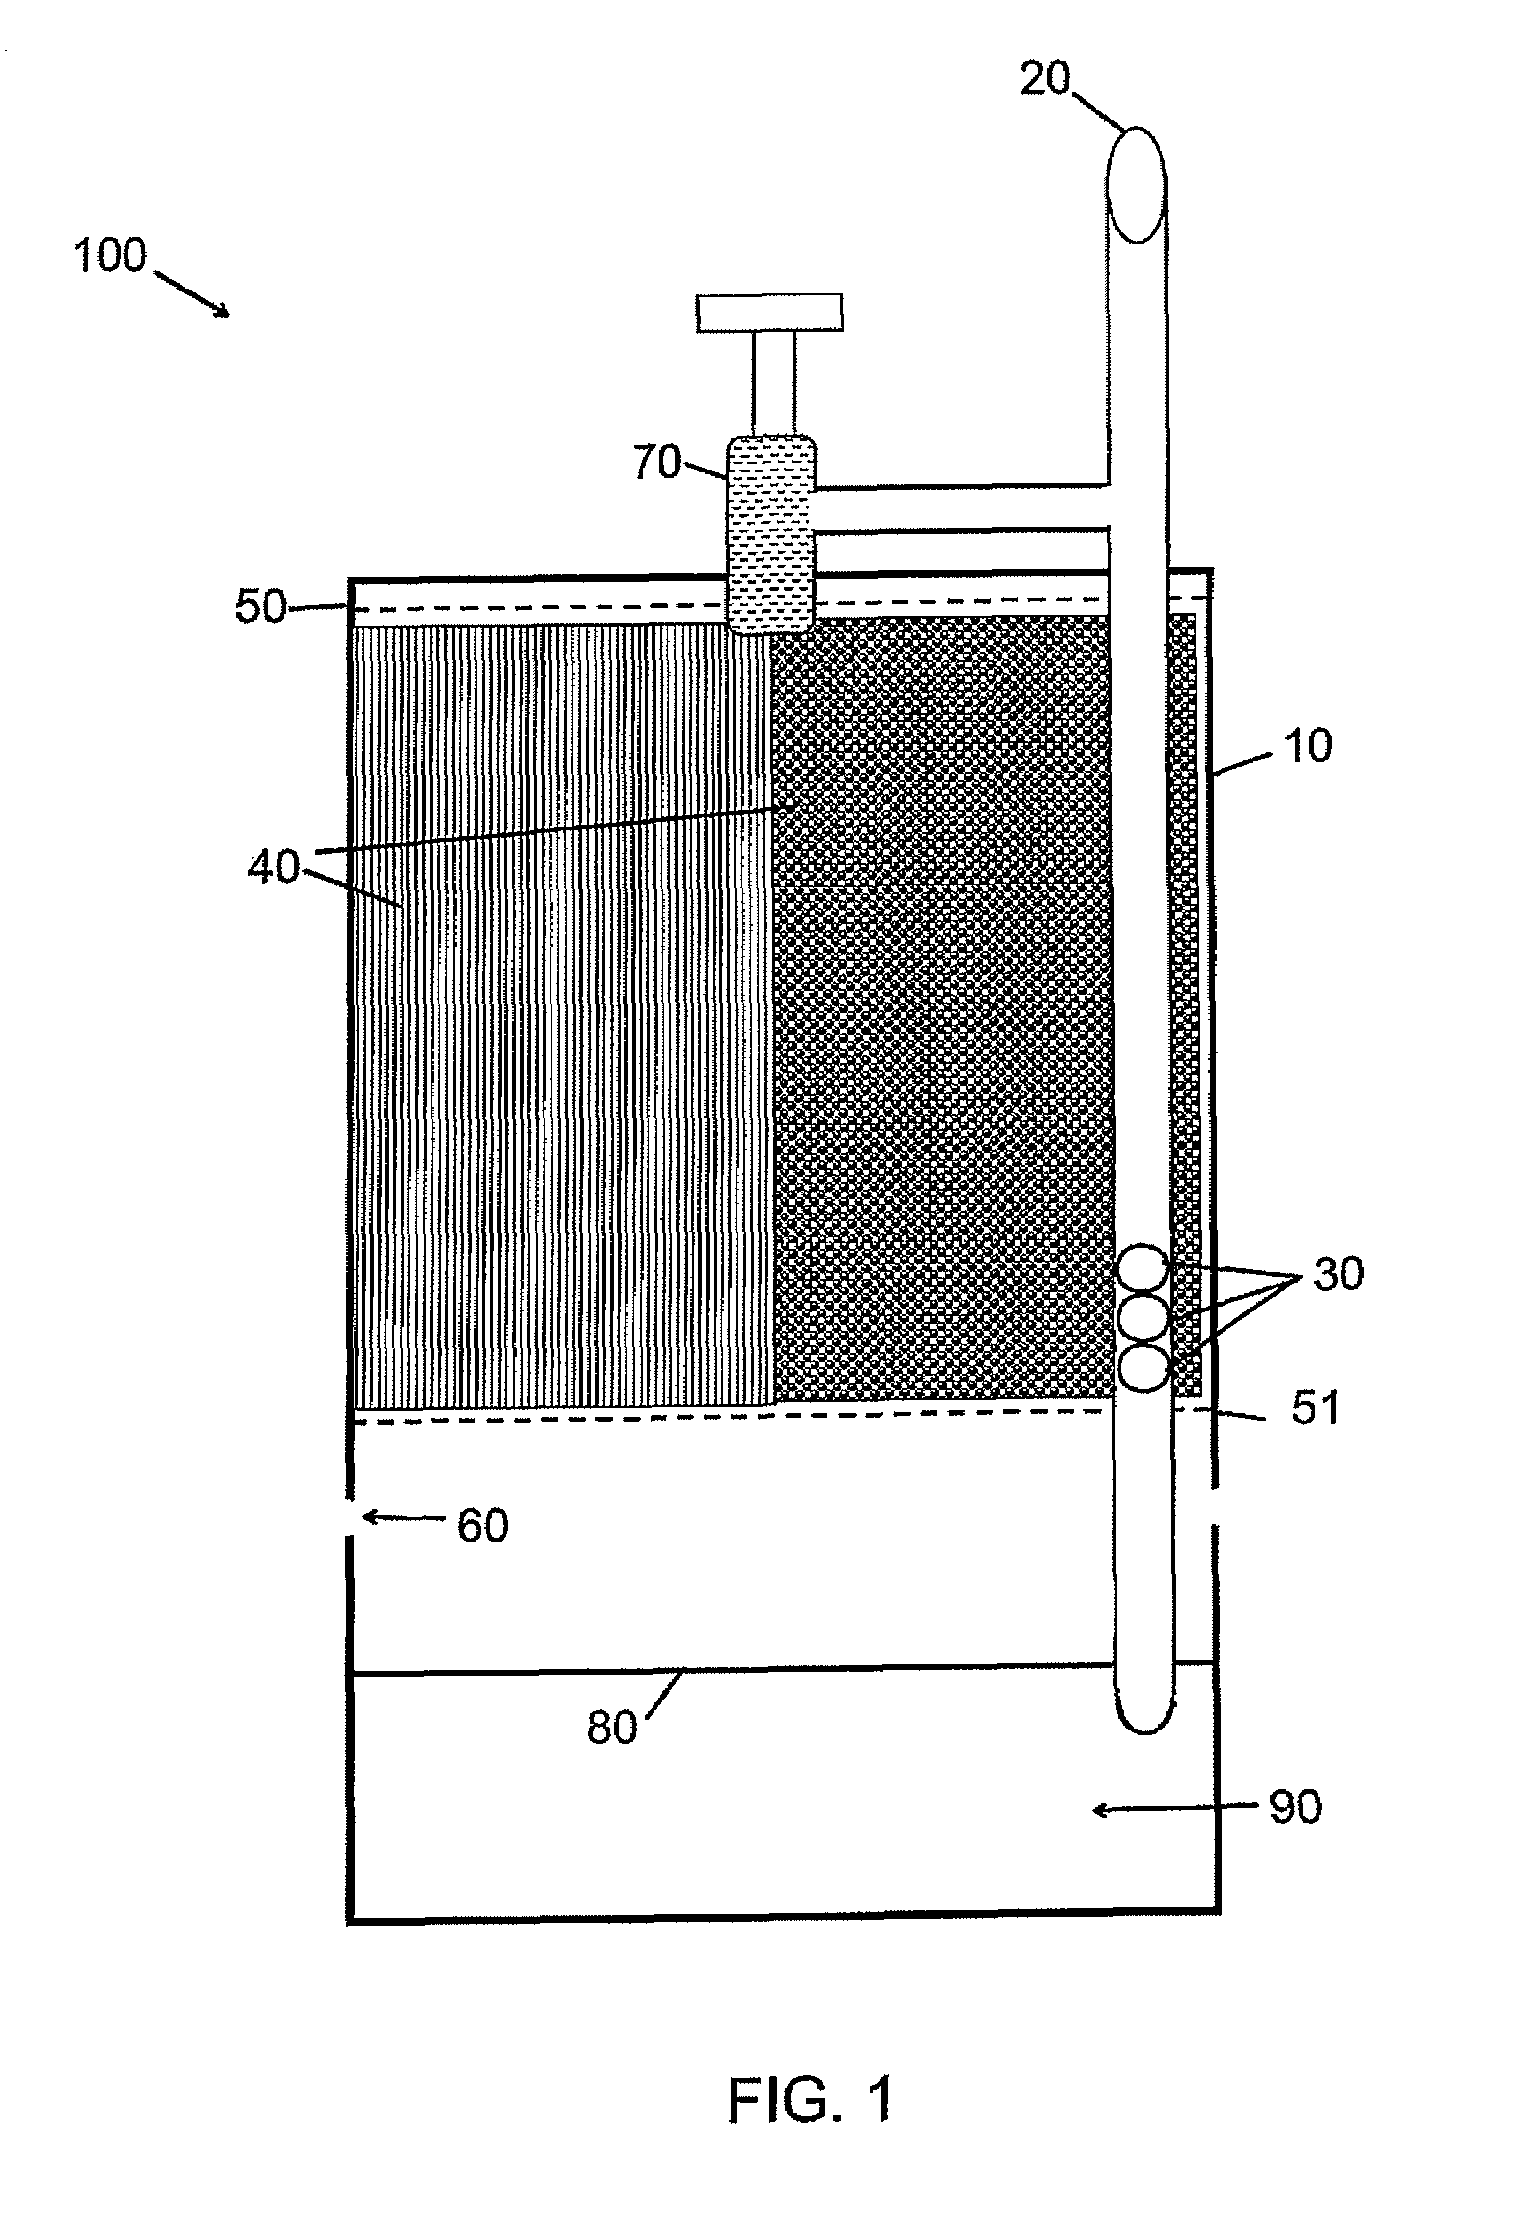 Method of growing bacteria for use in wastewater treatment